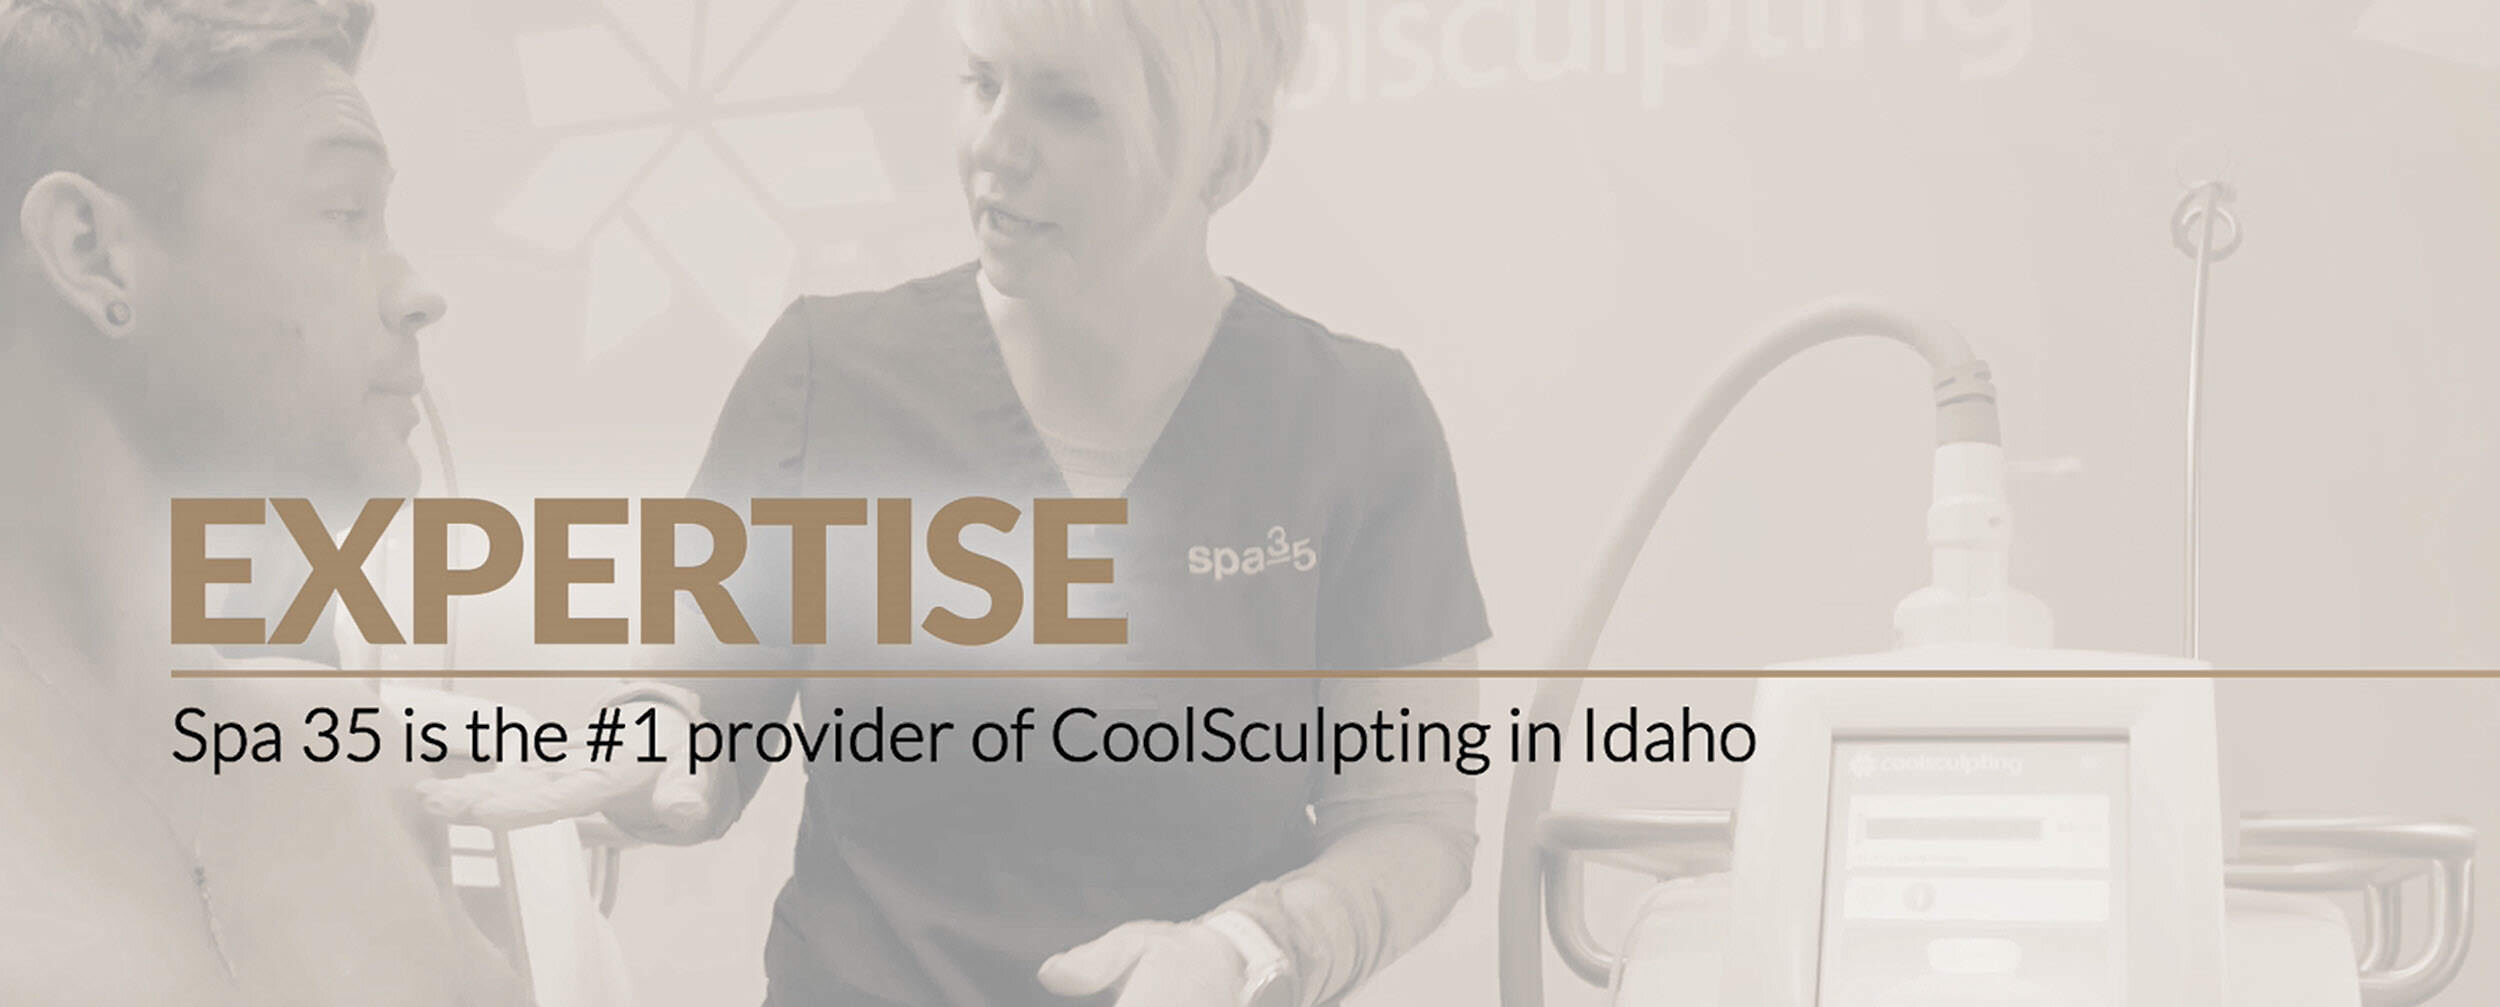 Master Certified in CoolSculpting, Consultants to Candela Medical - Worldwide leaders in cosmetic lasers (Copy) (Copy) (Copy) (Copy) (Copy) (Copy) (Copy)